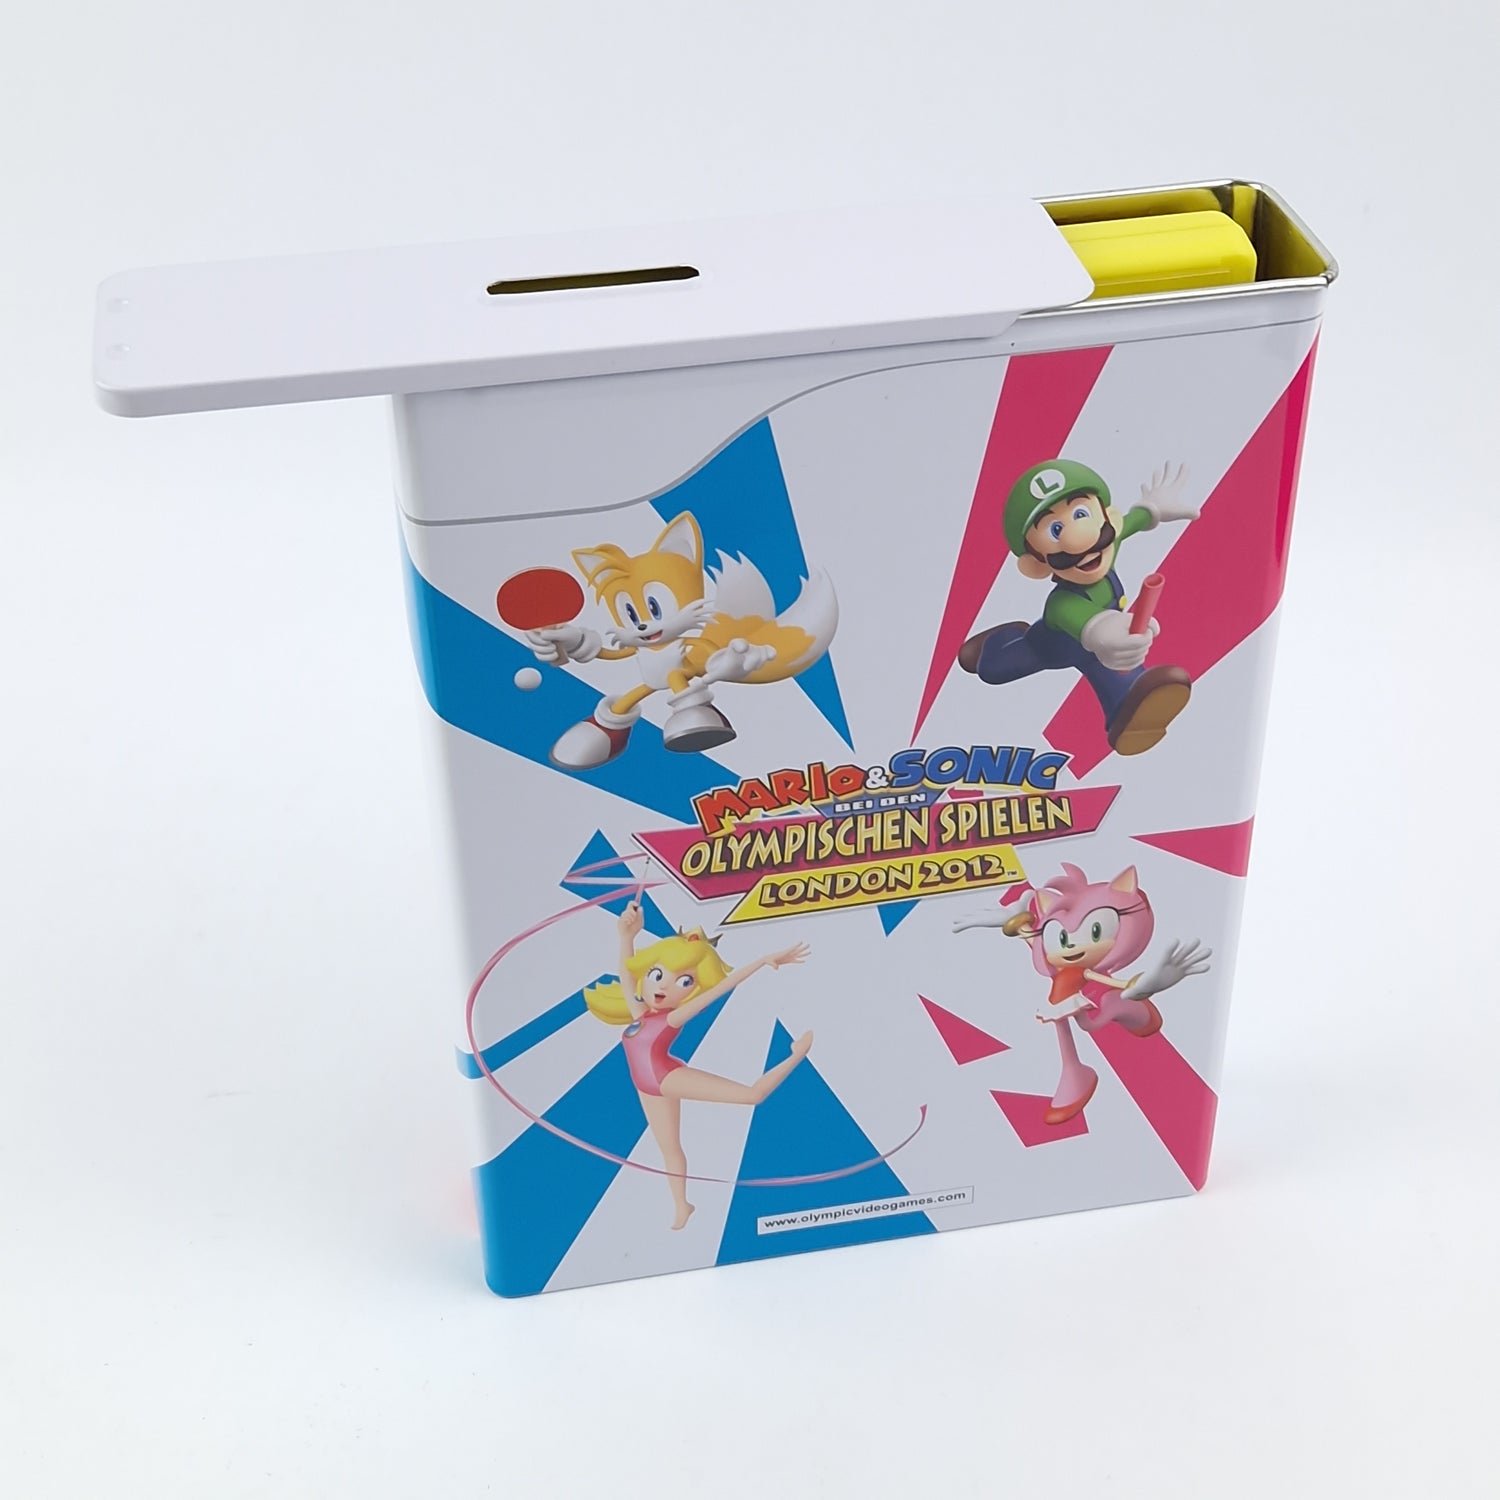 Nintendo Wii game: Mario & Sonic at the Olympic Games London 2012 - original packaging